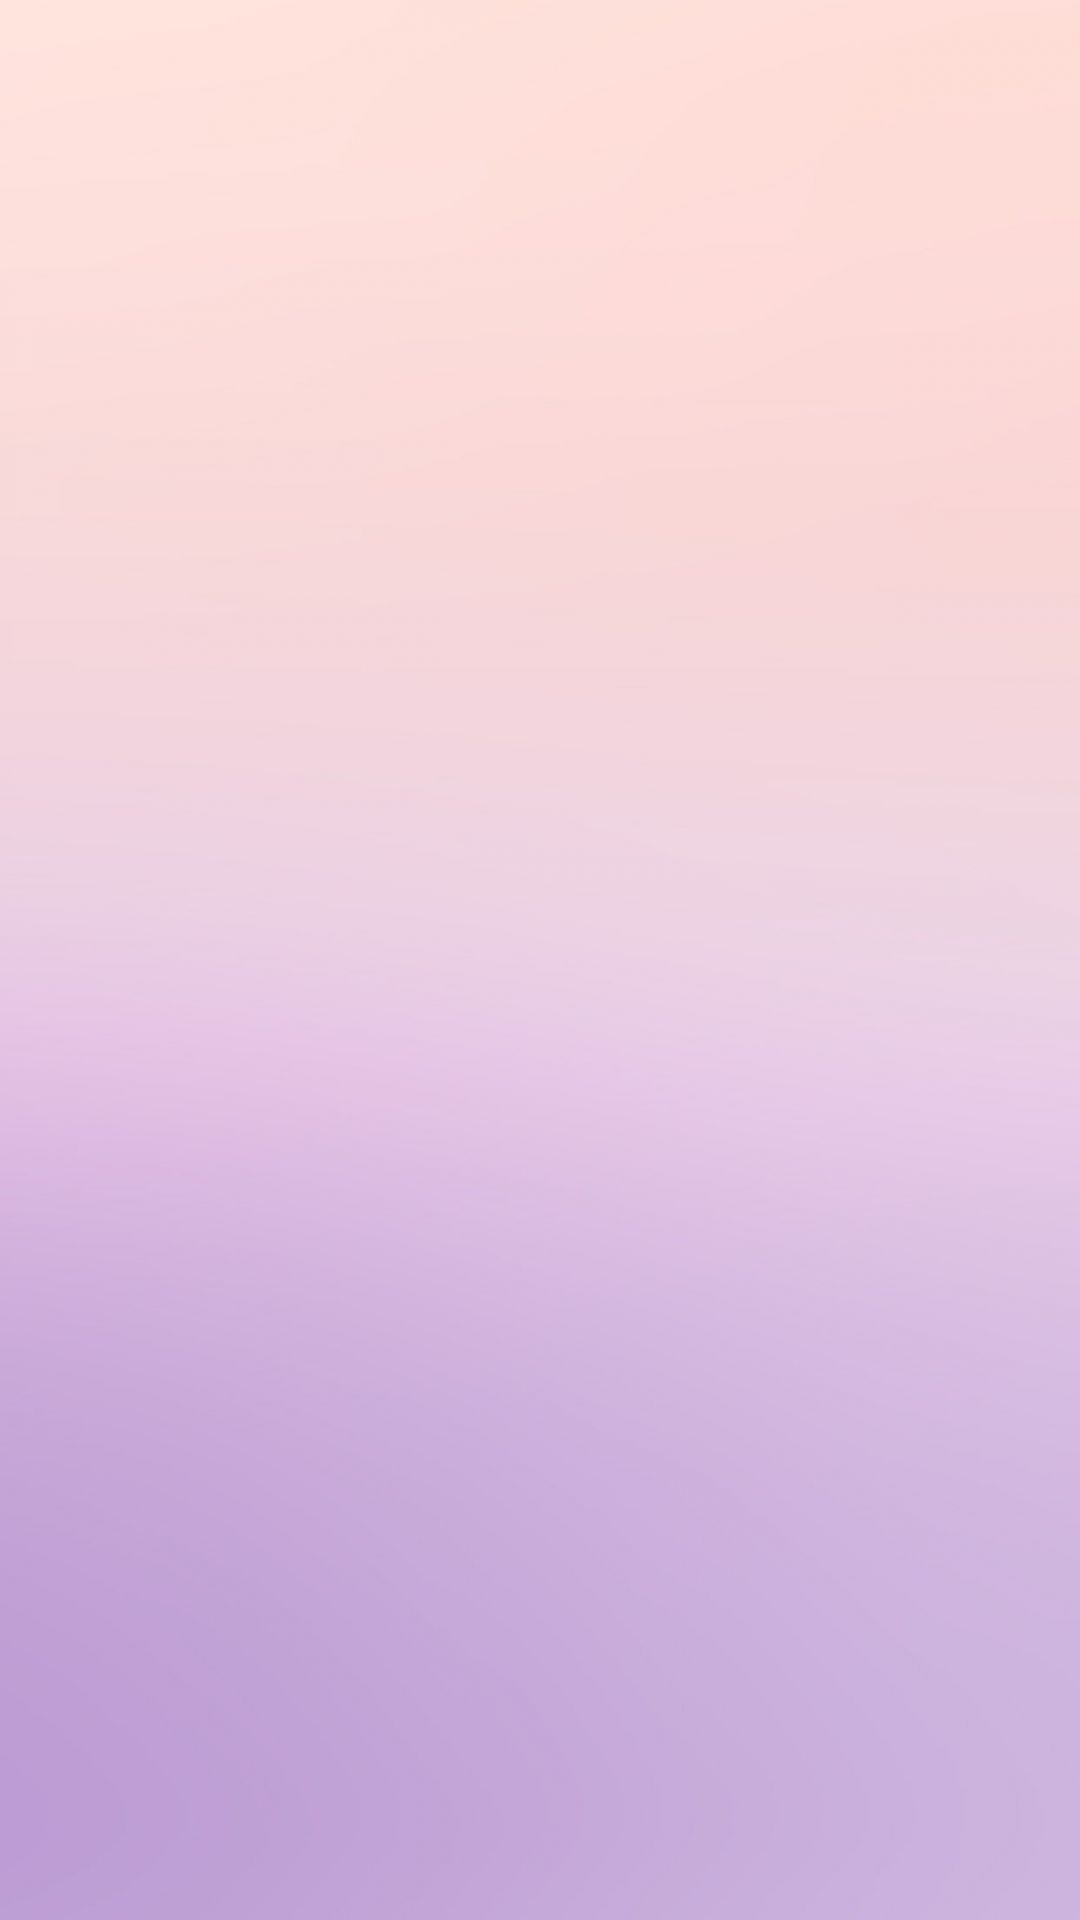 ✓[75+] iPhone7 wallpaper. pastel purple blur - Android / iPhone HD Wallpaper  Background Download (png / jpg) (2023)